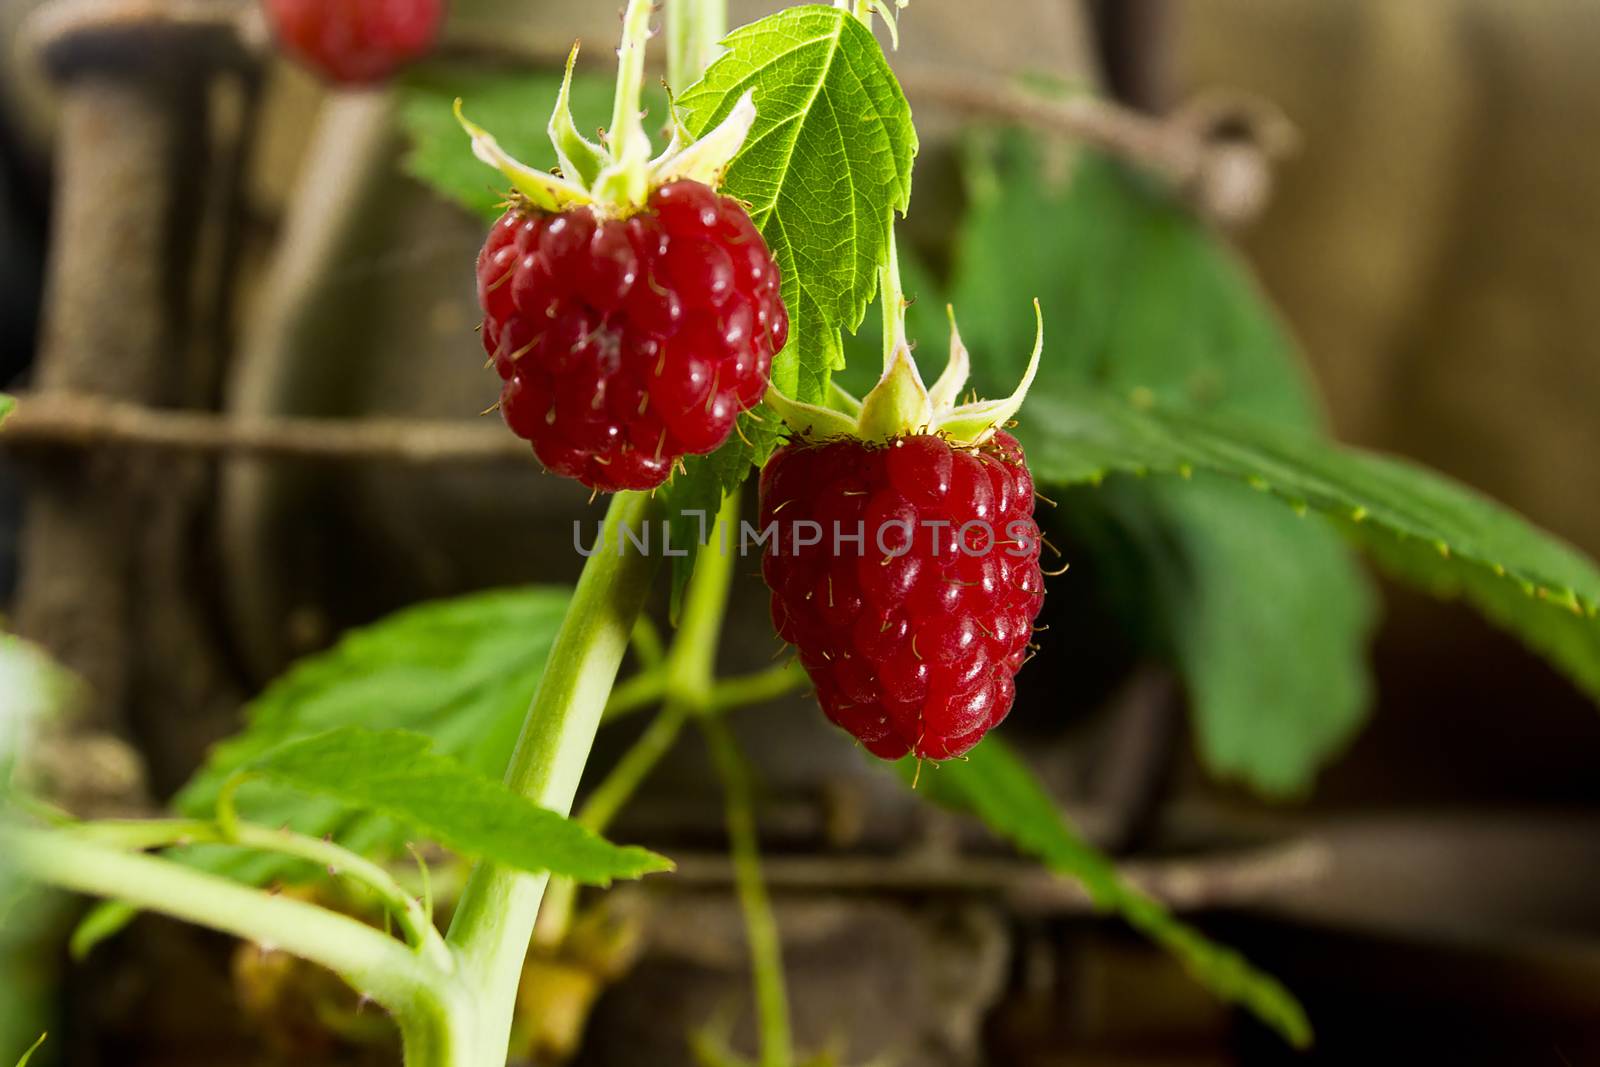 Raspberries on a branch on a rural background